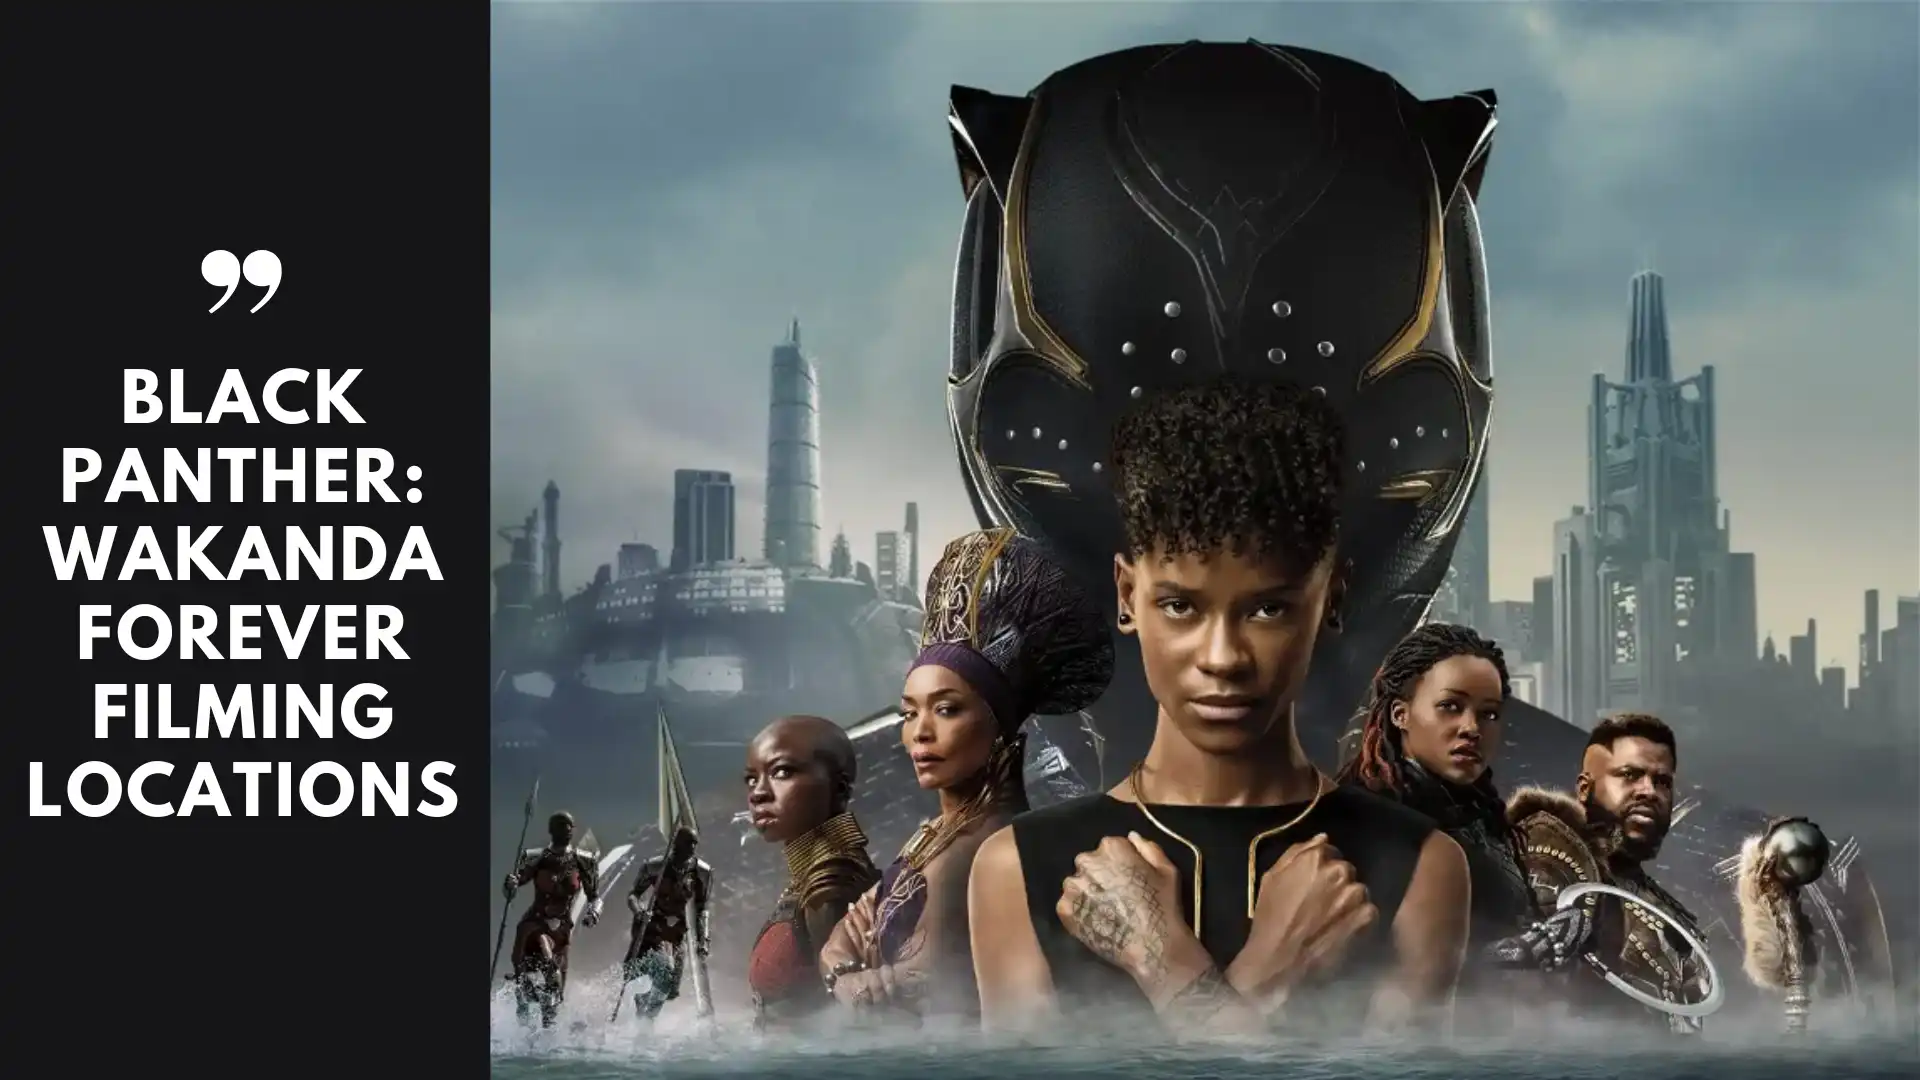 Black Panther: Wakanda Forever Filming Locations